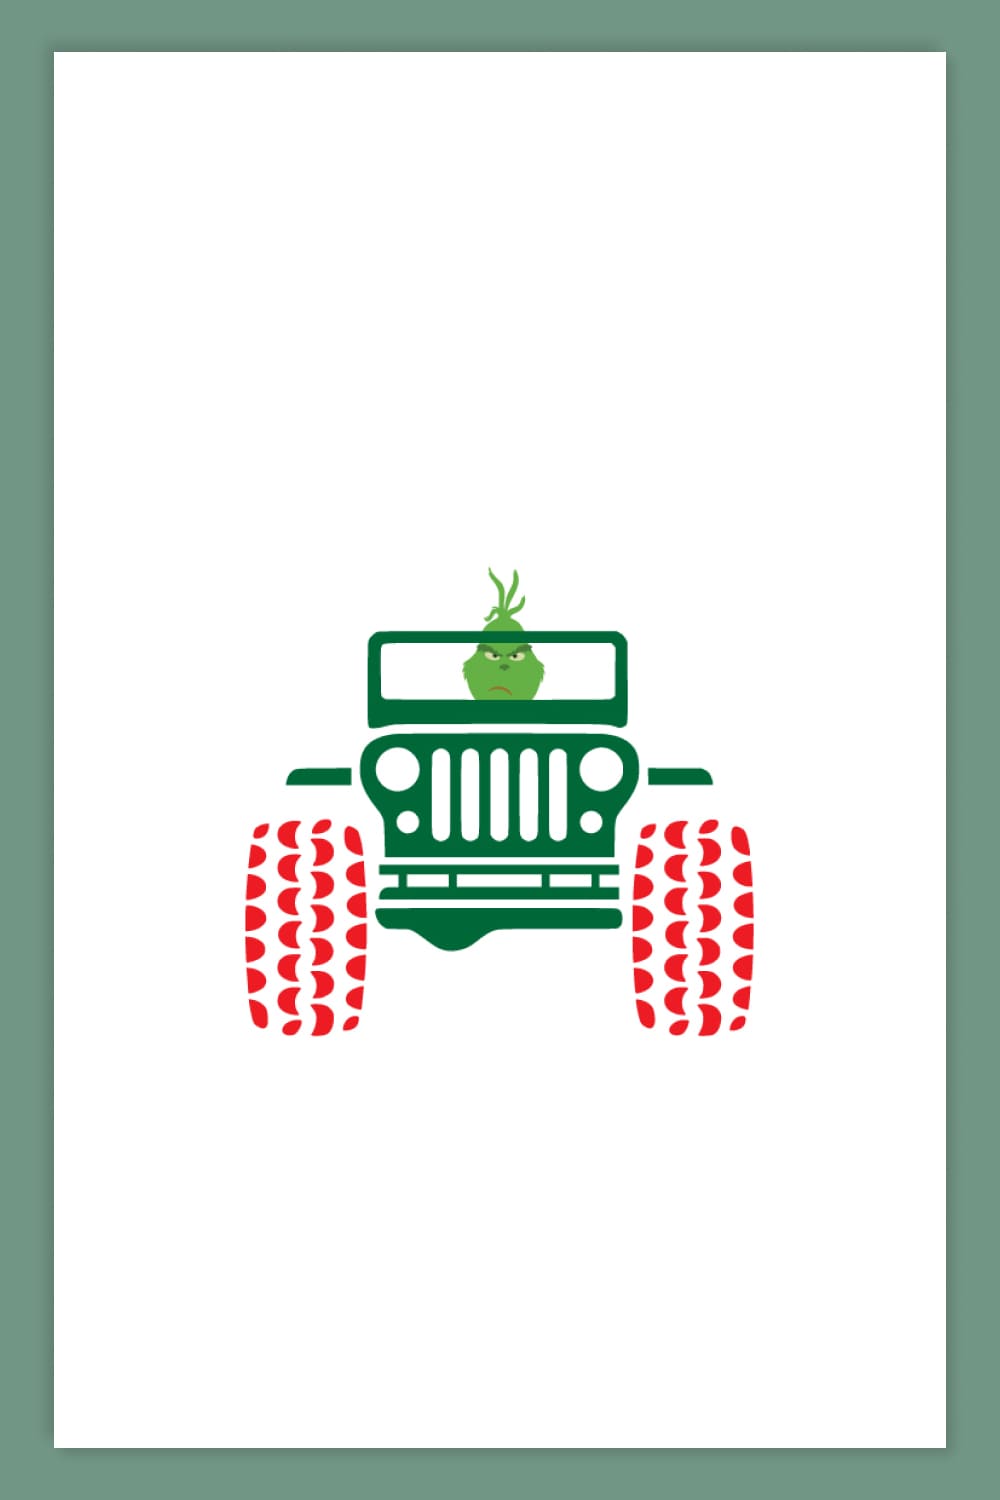 The Grinch driving a green Jeep Wrangler with red wheels.